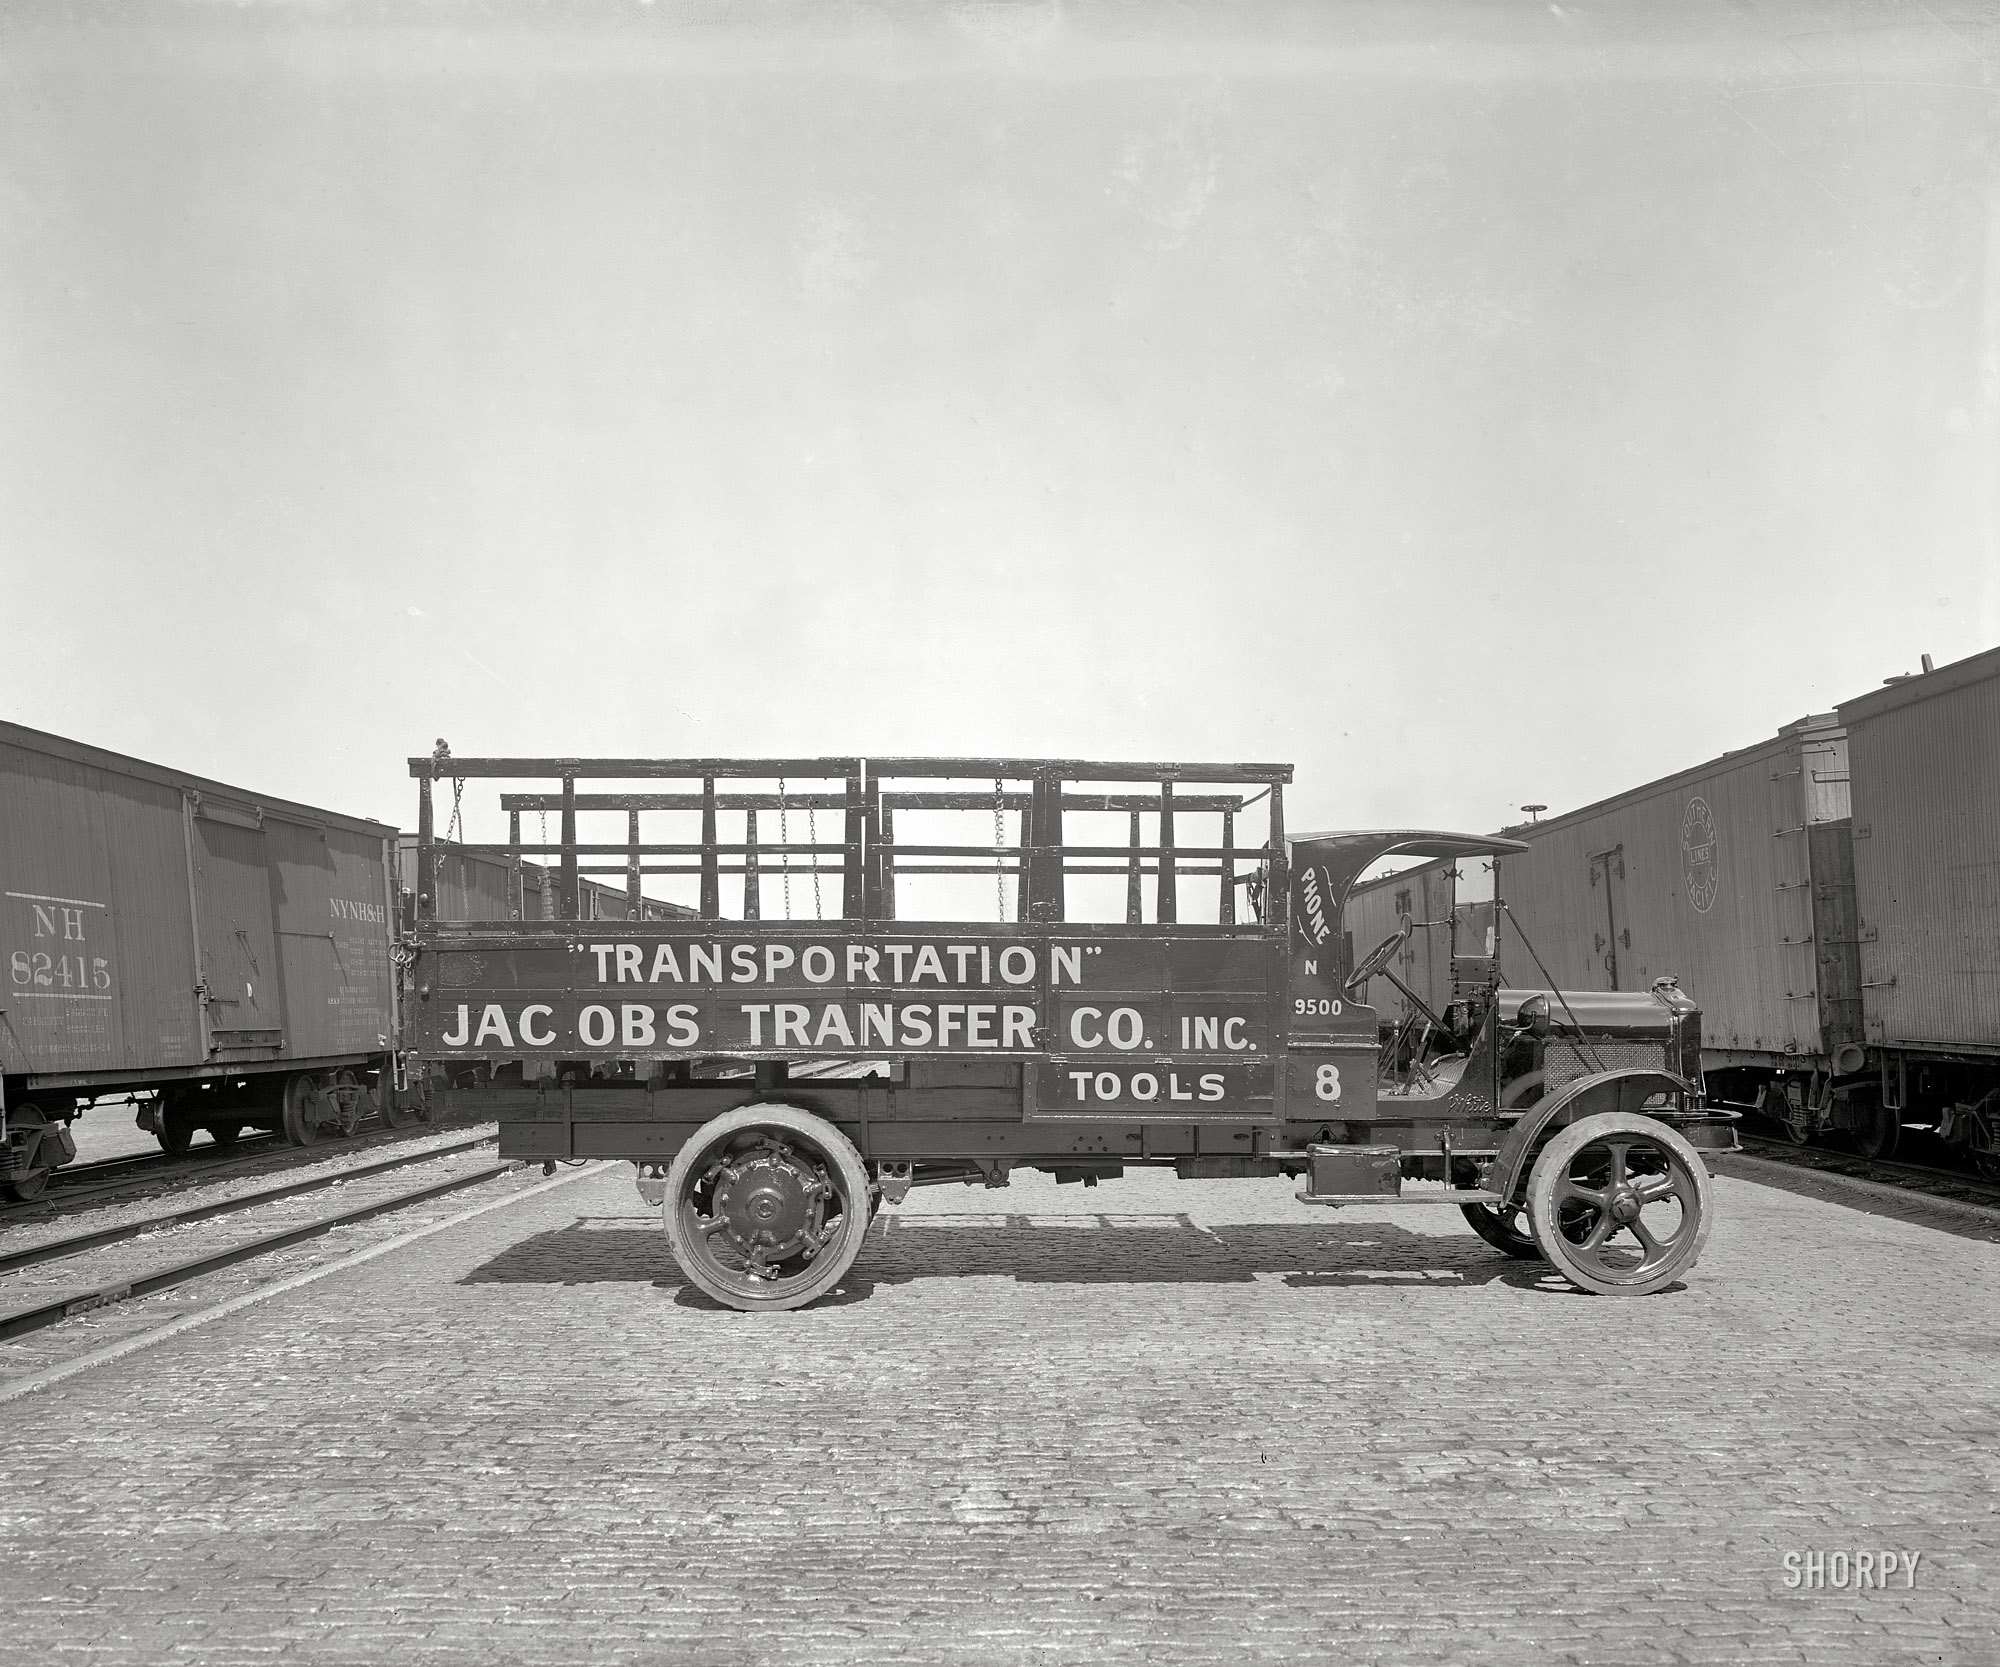 Washington, D.C., circa 1917. "Harry Haas -- Jacobs truck." Prehistoric "transportation," complete with irony quotes. National Photo. View full size.